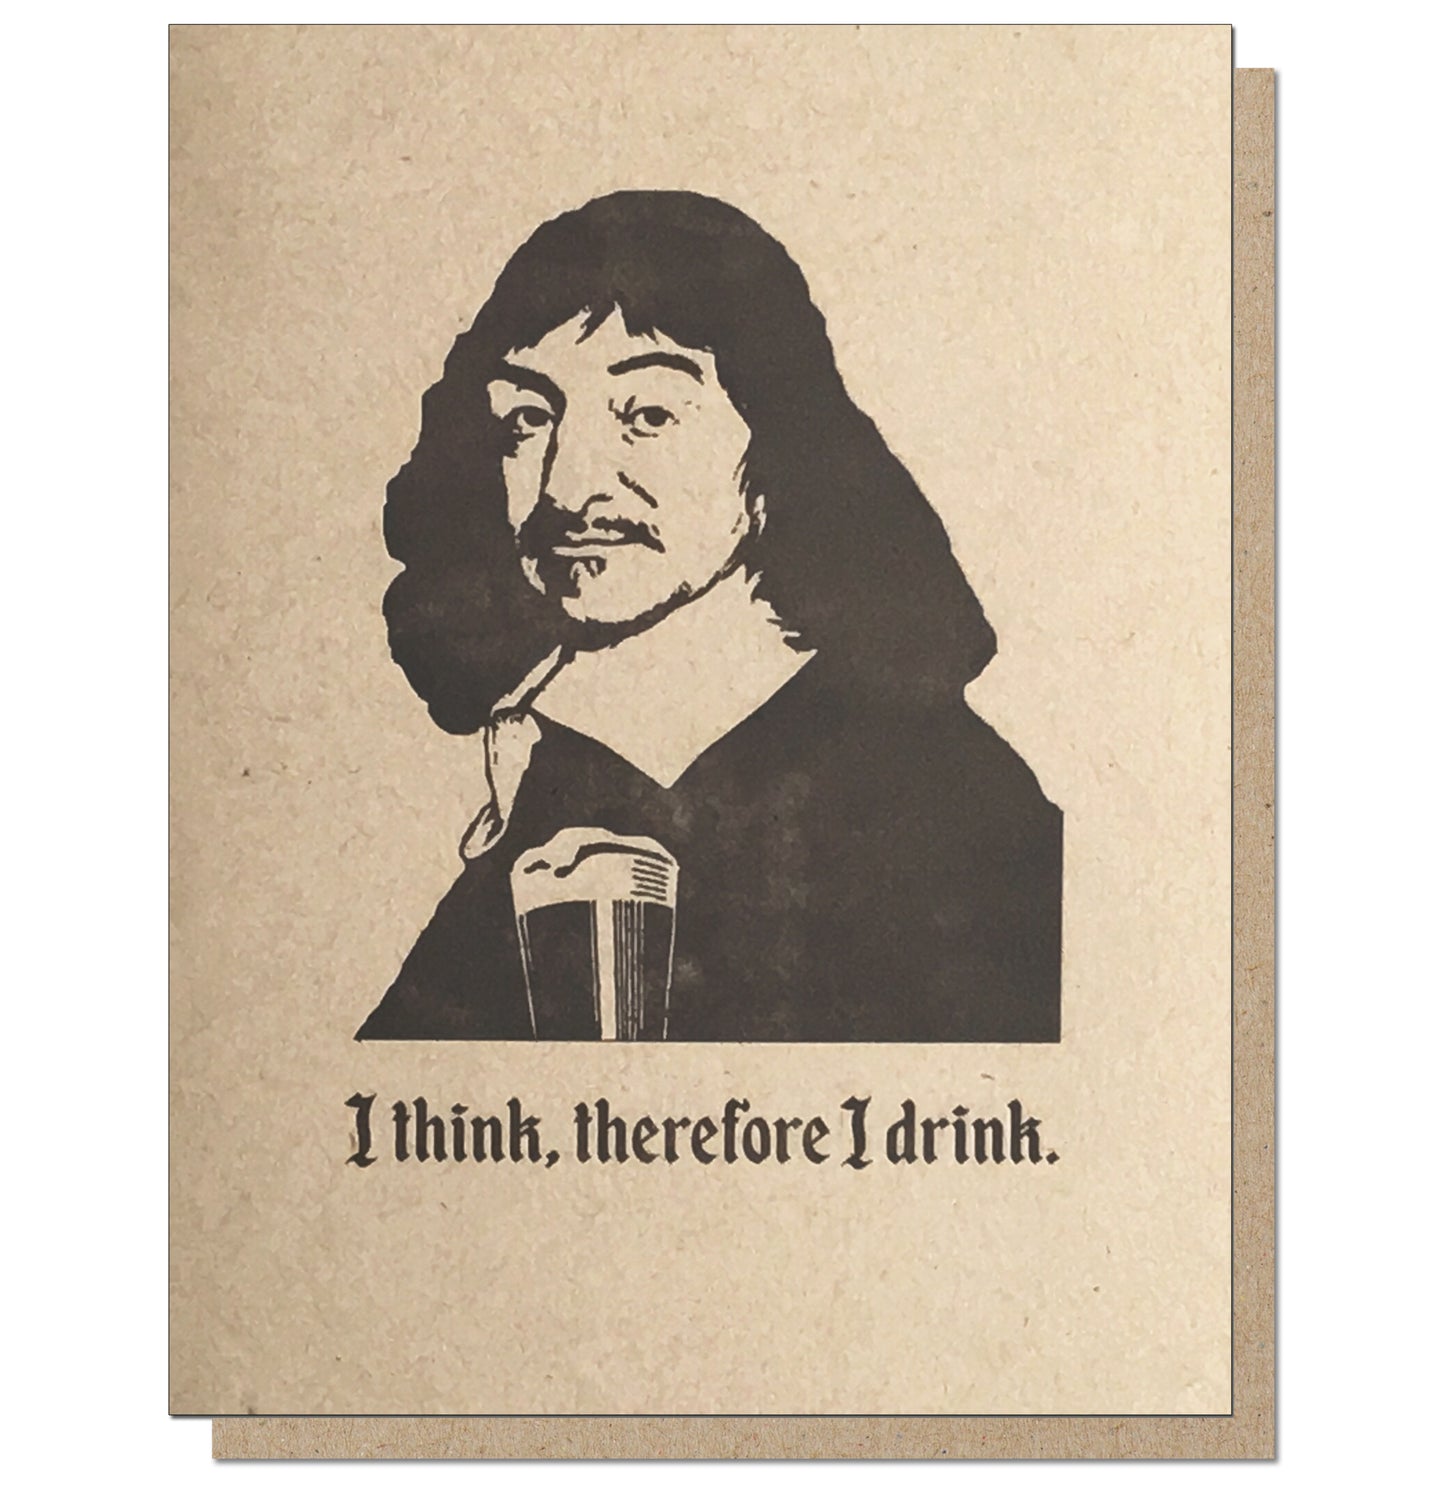 I Think, therefore I drink. Letterpress Philosophy Greeting Card.